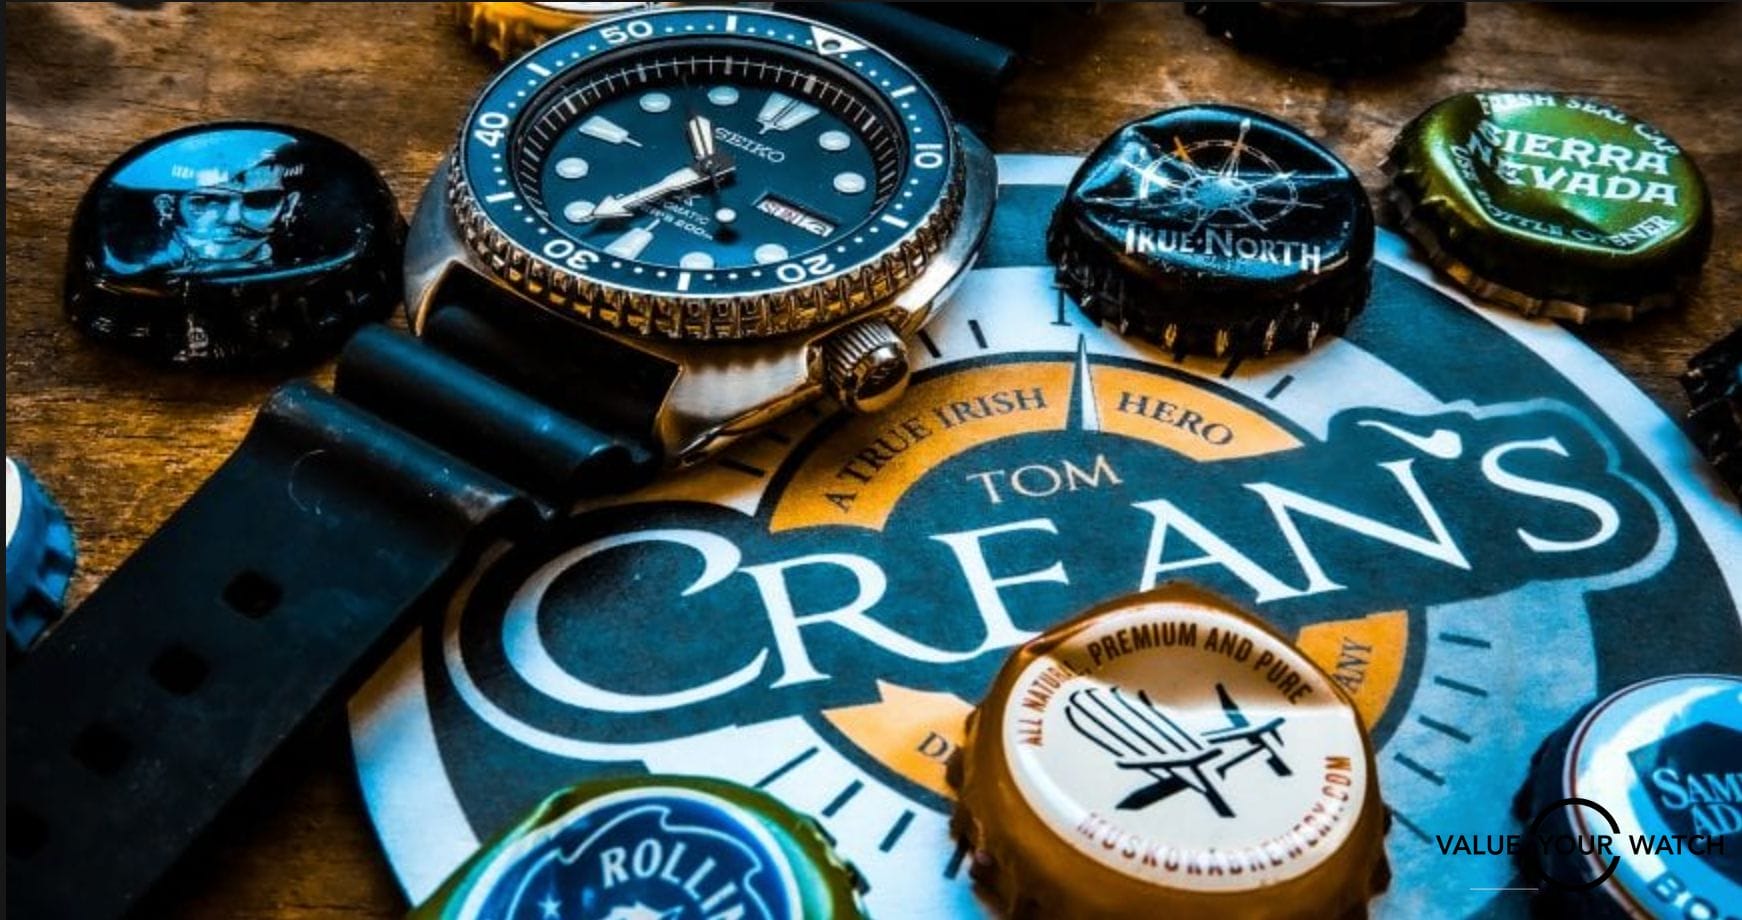 The best escrow service to use when purchasing luxury watches